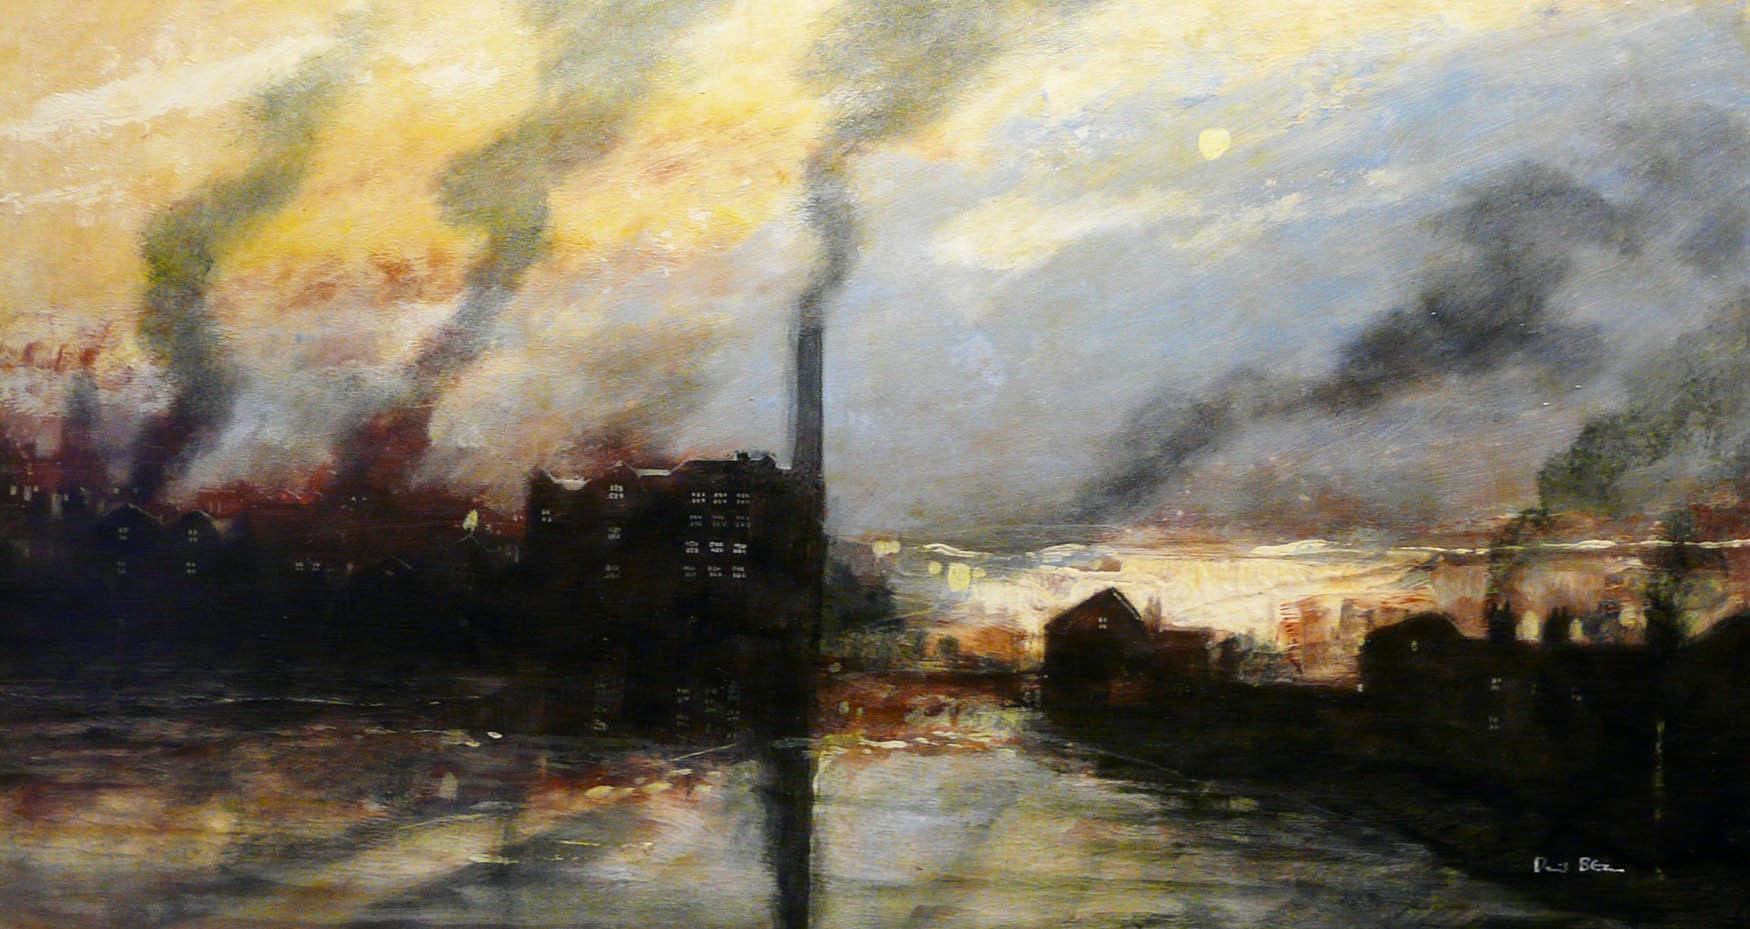 Reflections of the Mill by David Bez, Nostalgic | Northern | Industrial | Landscape